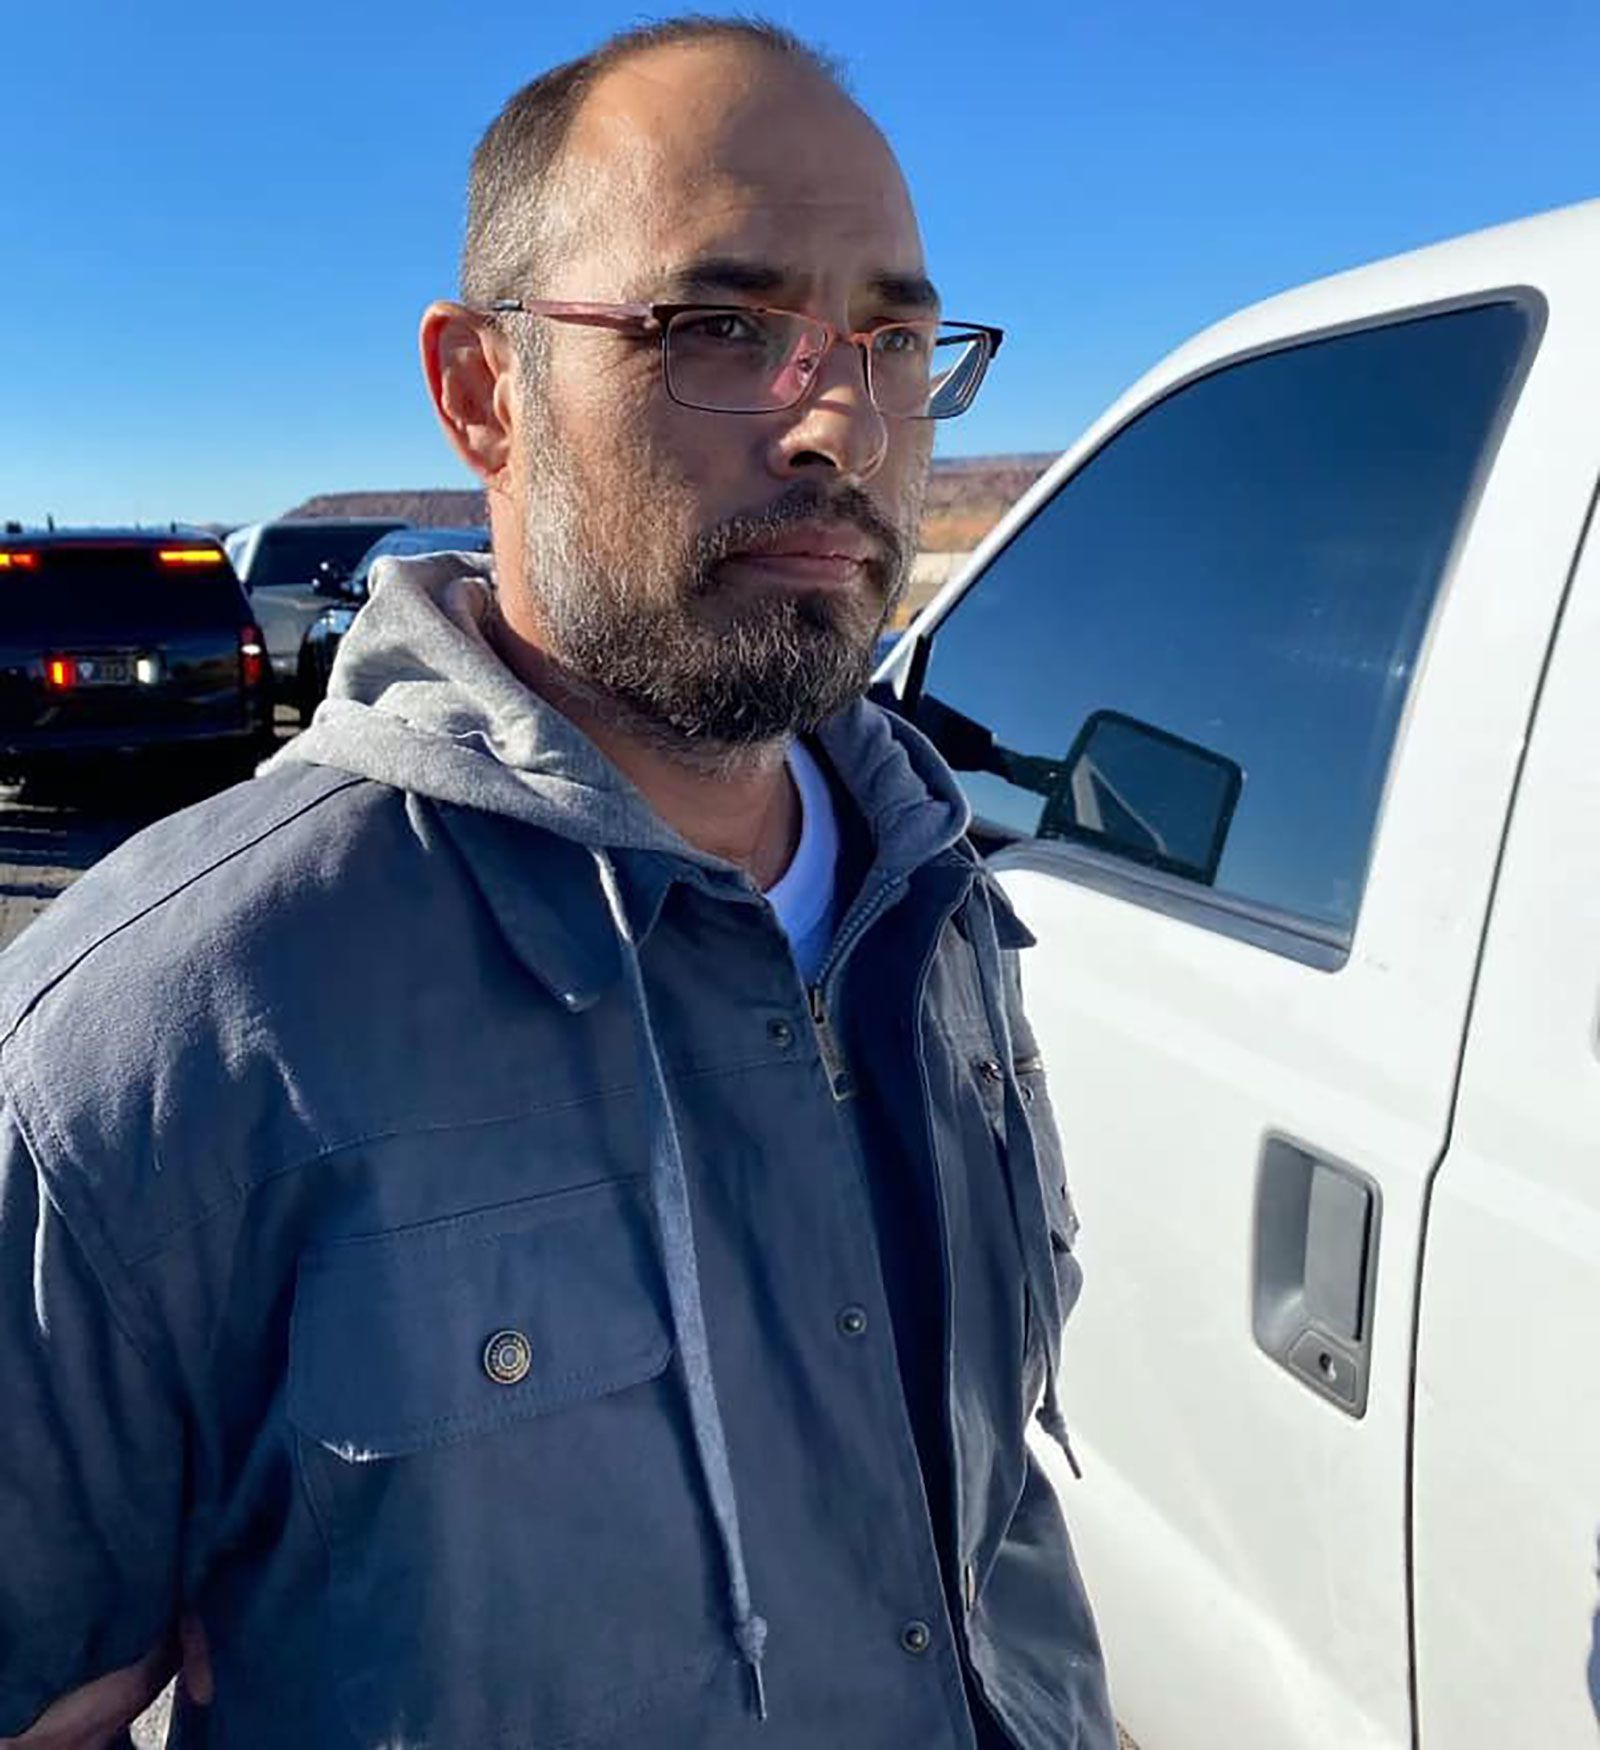 Hanme K. Clark, the suspect wanted in the deaths of three people in Custer County, Colorado, on Monday has been arrested, the Custer County Sheriff's Office confirmed.